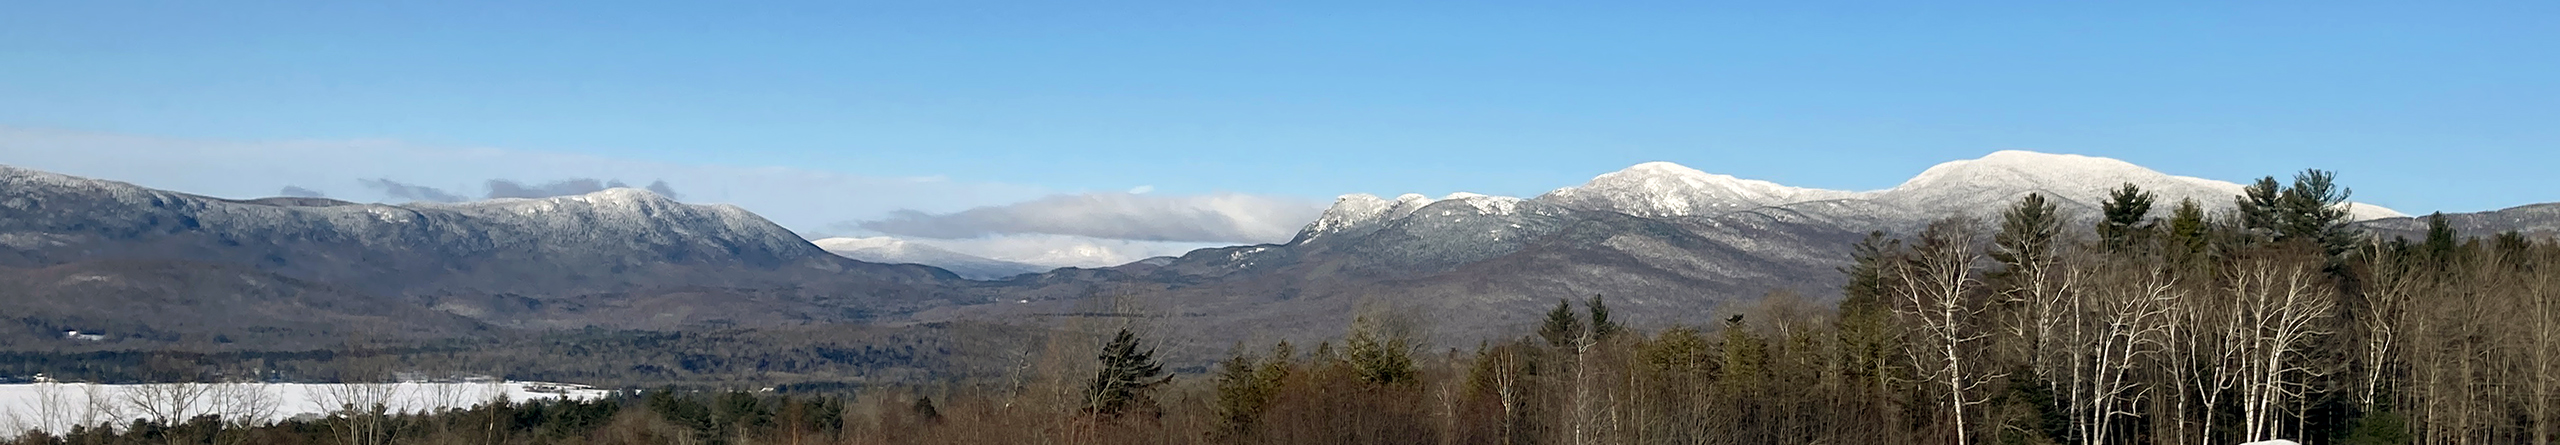 Tumbledown Mountain from Center Hill